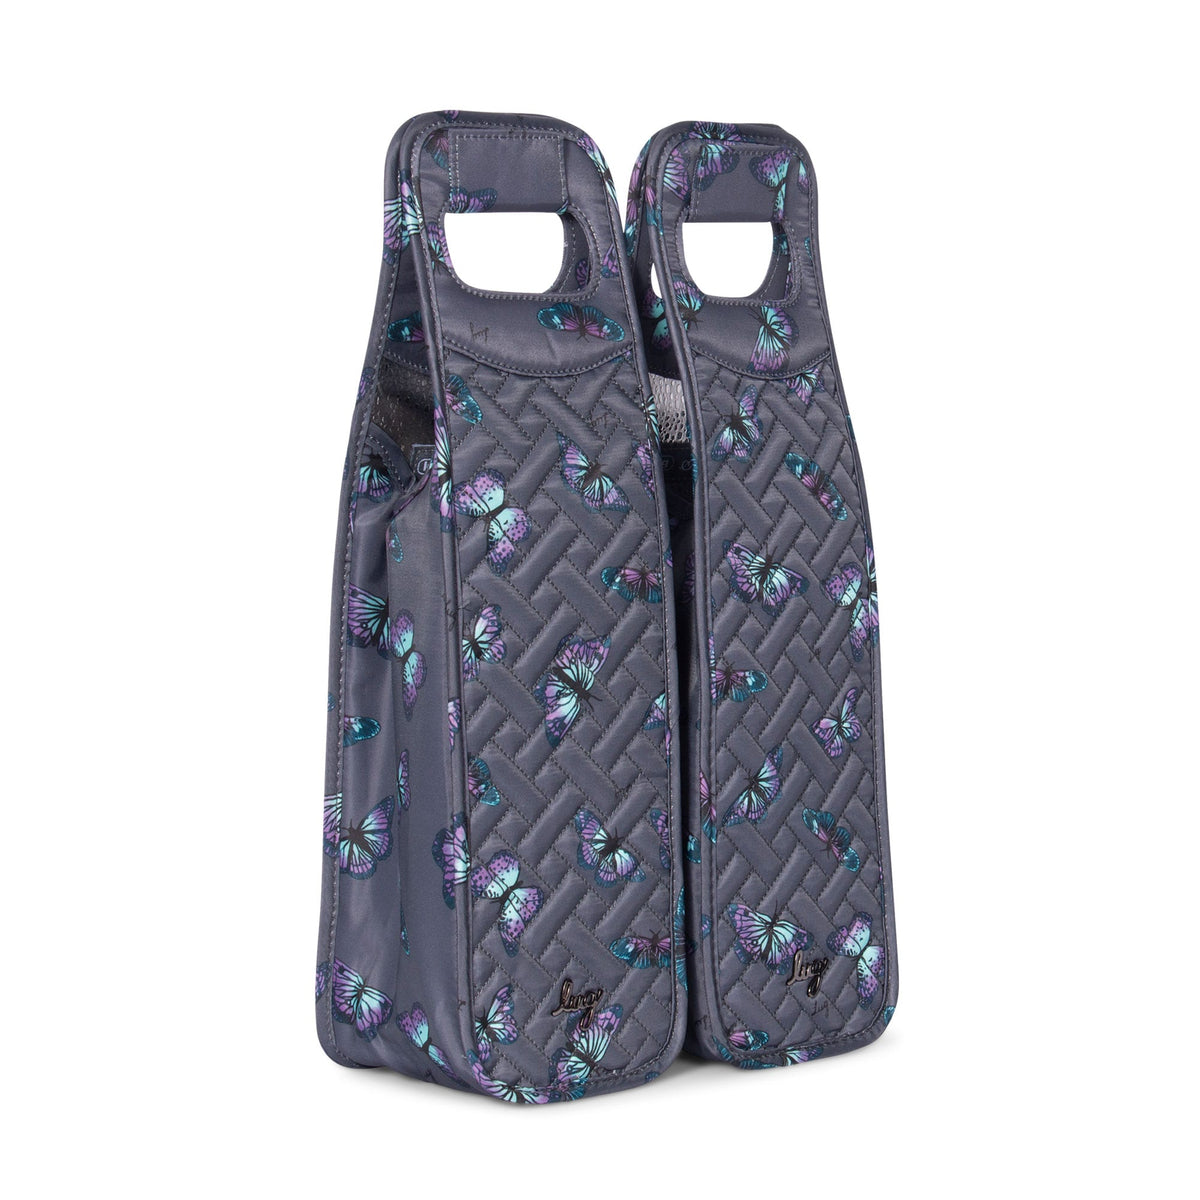 Shuttle 2pc Wine Totes